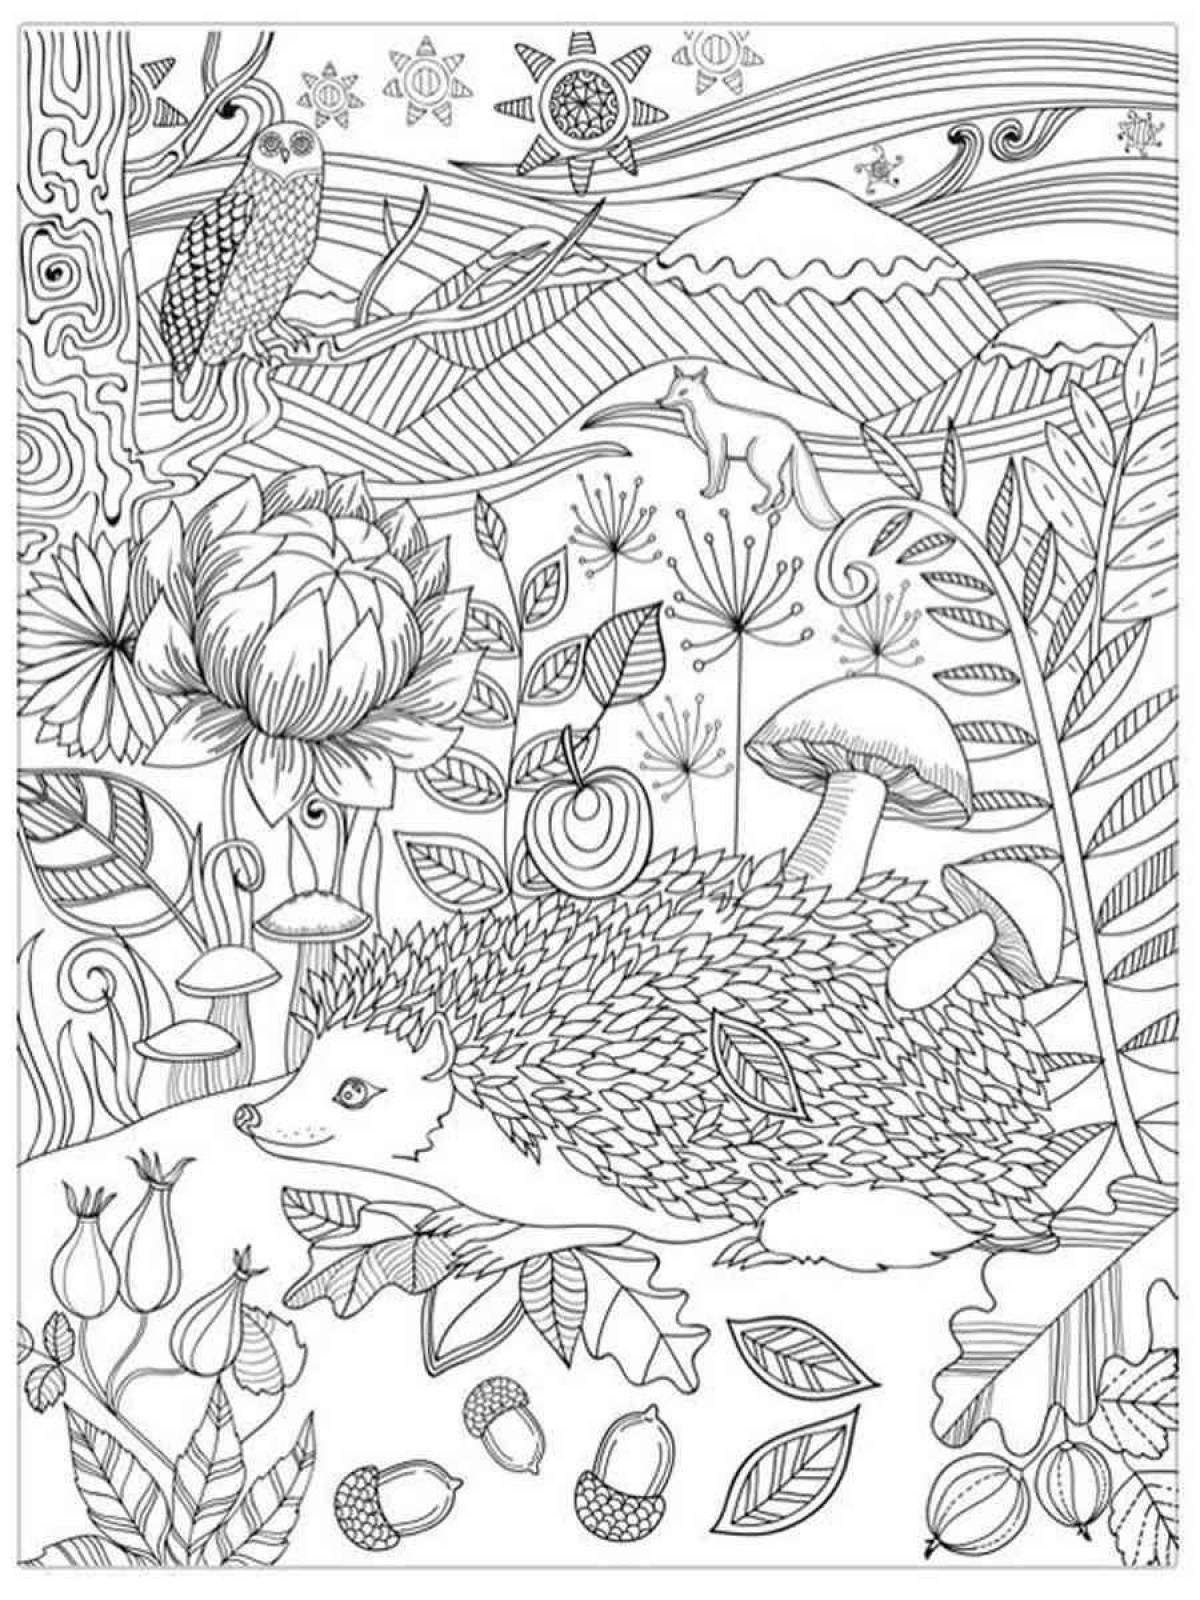 Inspirational meditative coloring book for adults